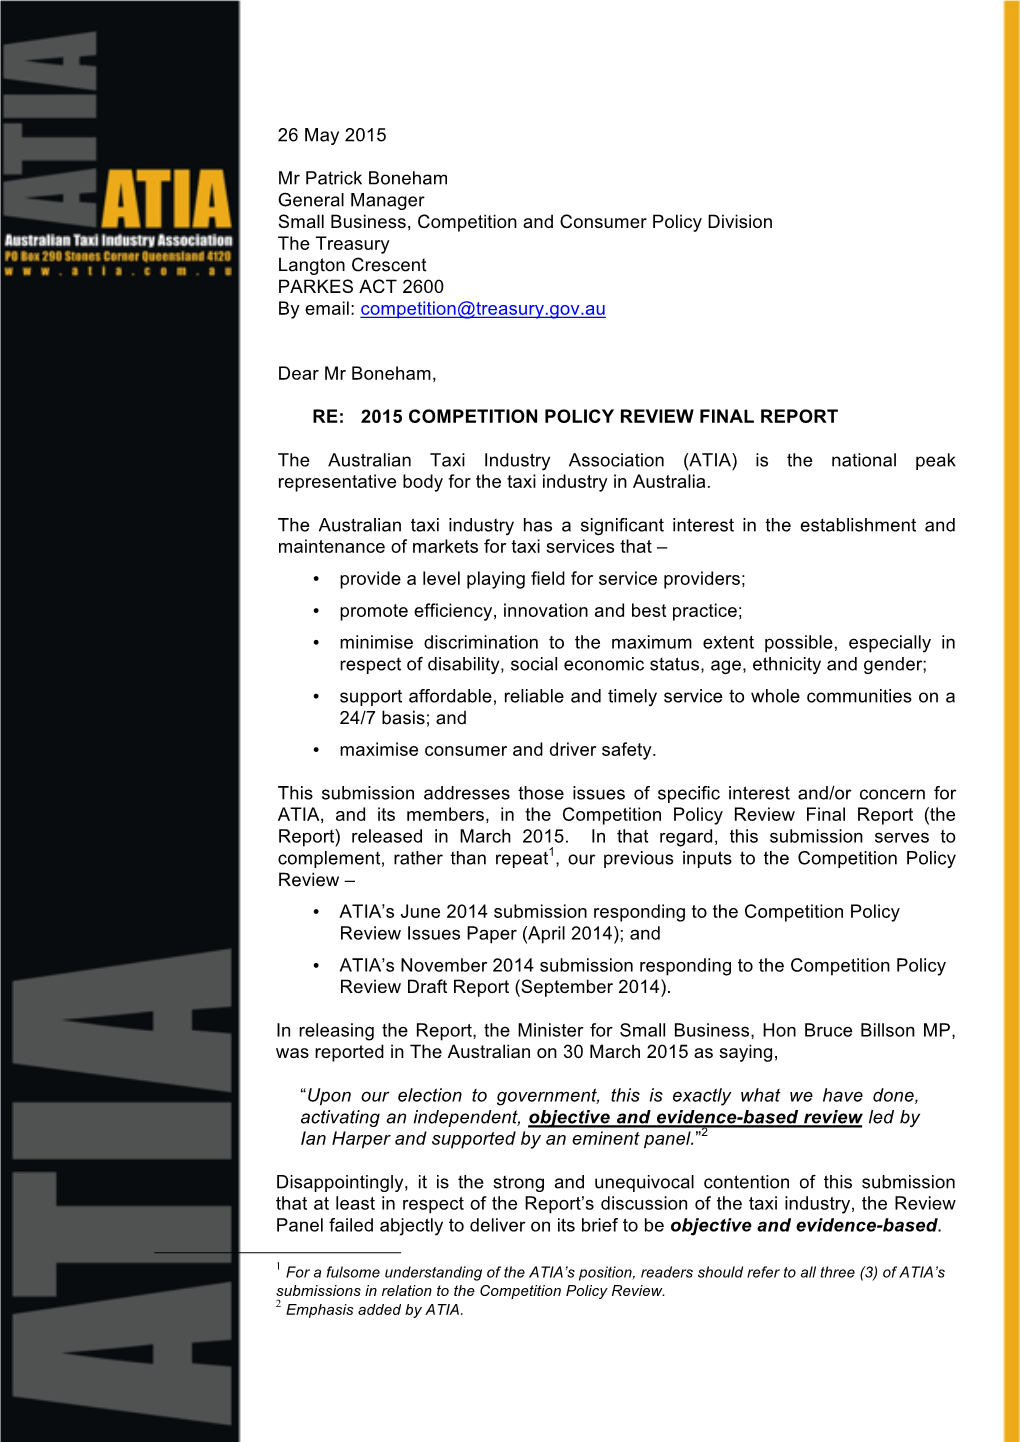 Australian Taxi Industry Association (ATIA) Is the National Peak Representative Body for the Taxi Industry in Australia